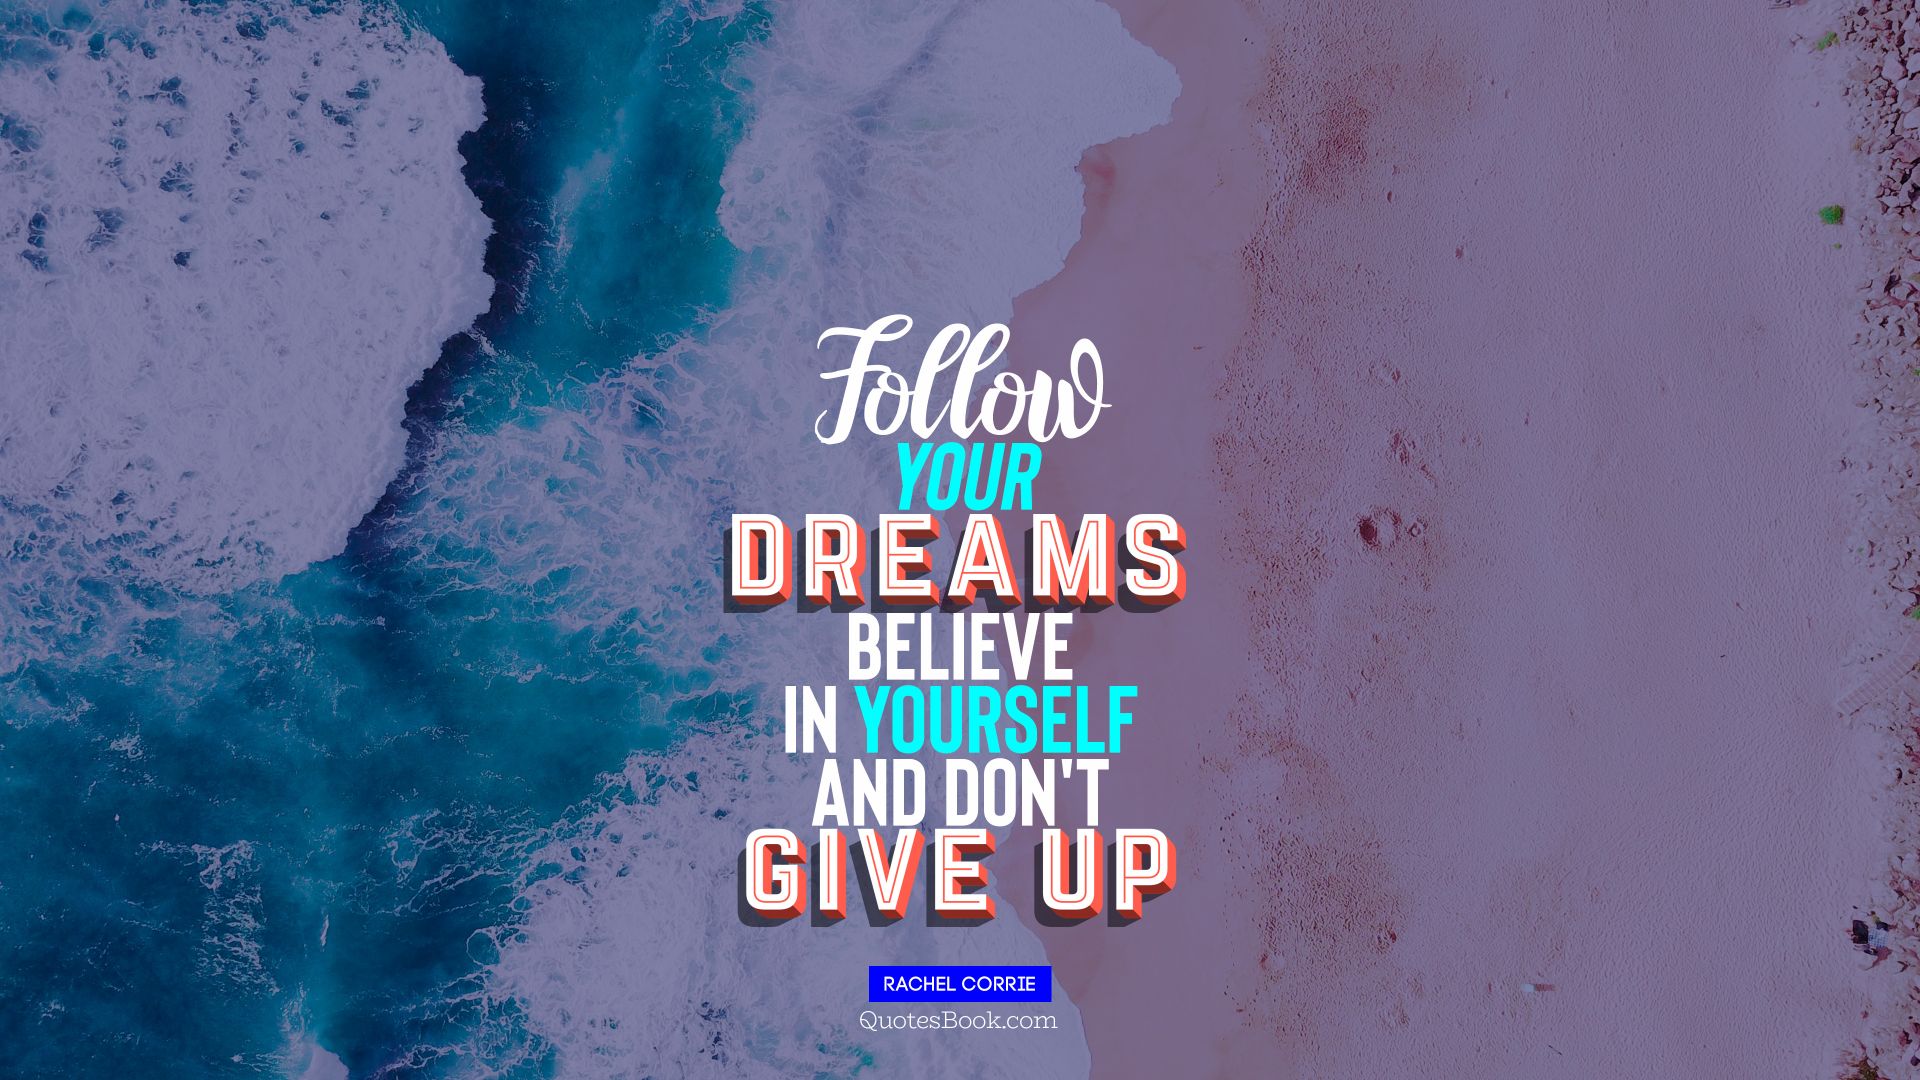 Follow your  dreams believe in yourself and don't  give up. - Quote by Rachel Corrie